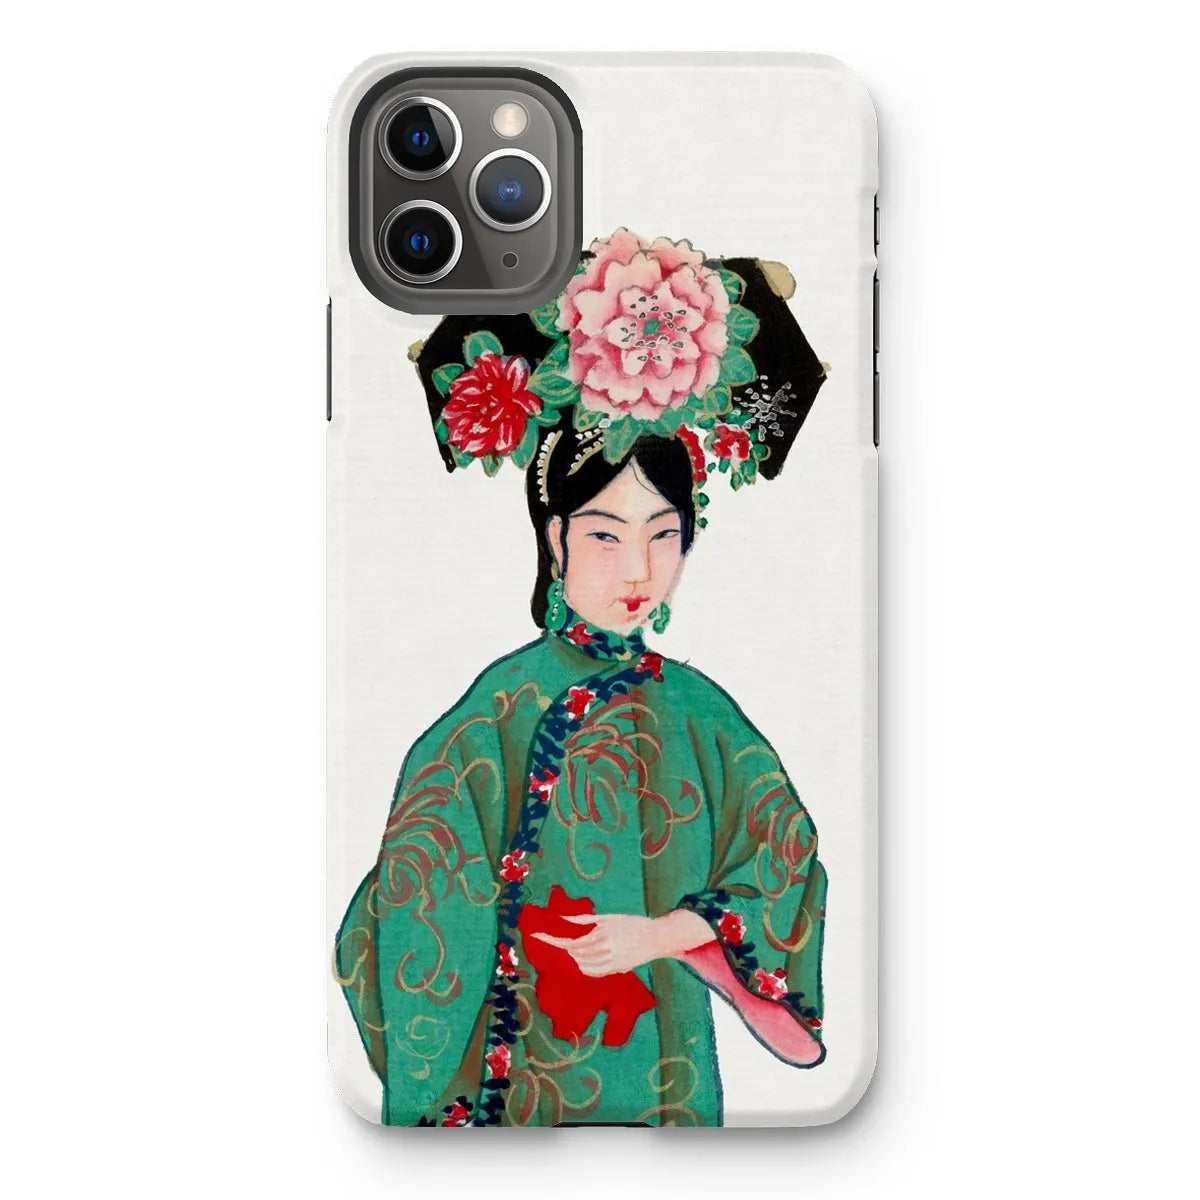 Chinese Noblewoman In Manchu Couture Art Phone Case - Iphone 11 Pro Max / Matte - Mobile Phone Cases - Aesthetic Art